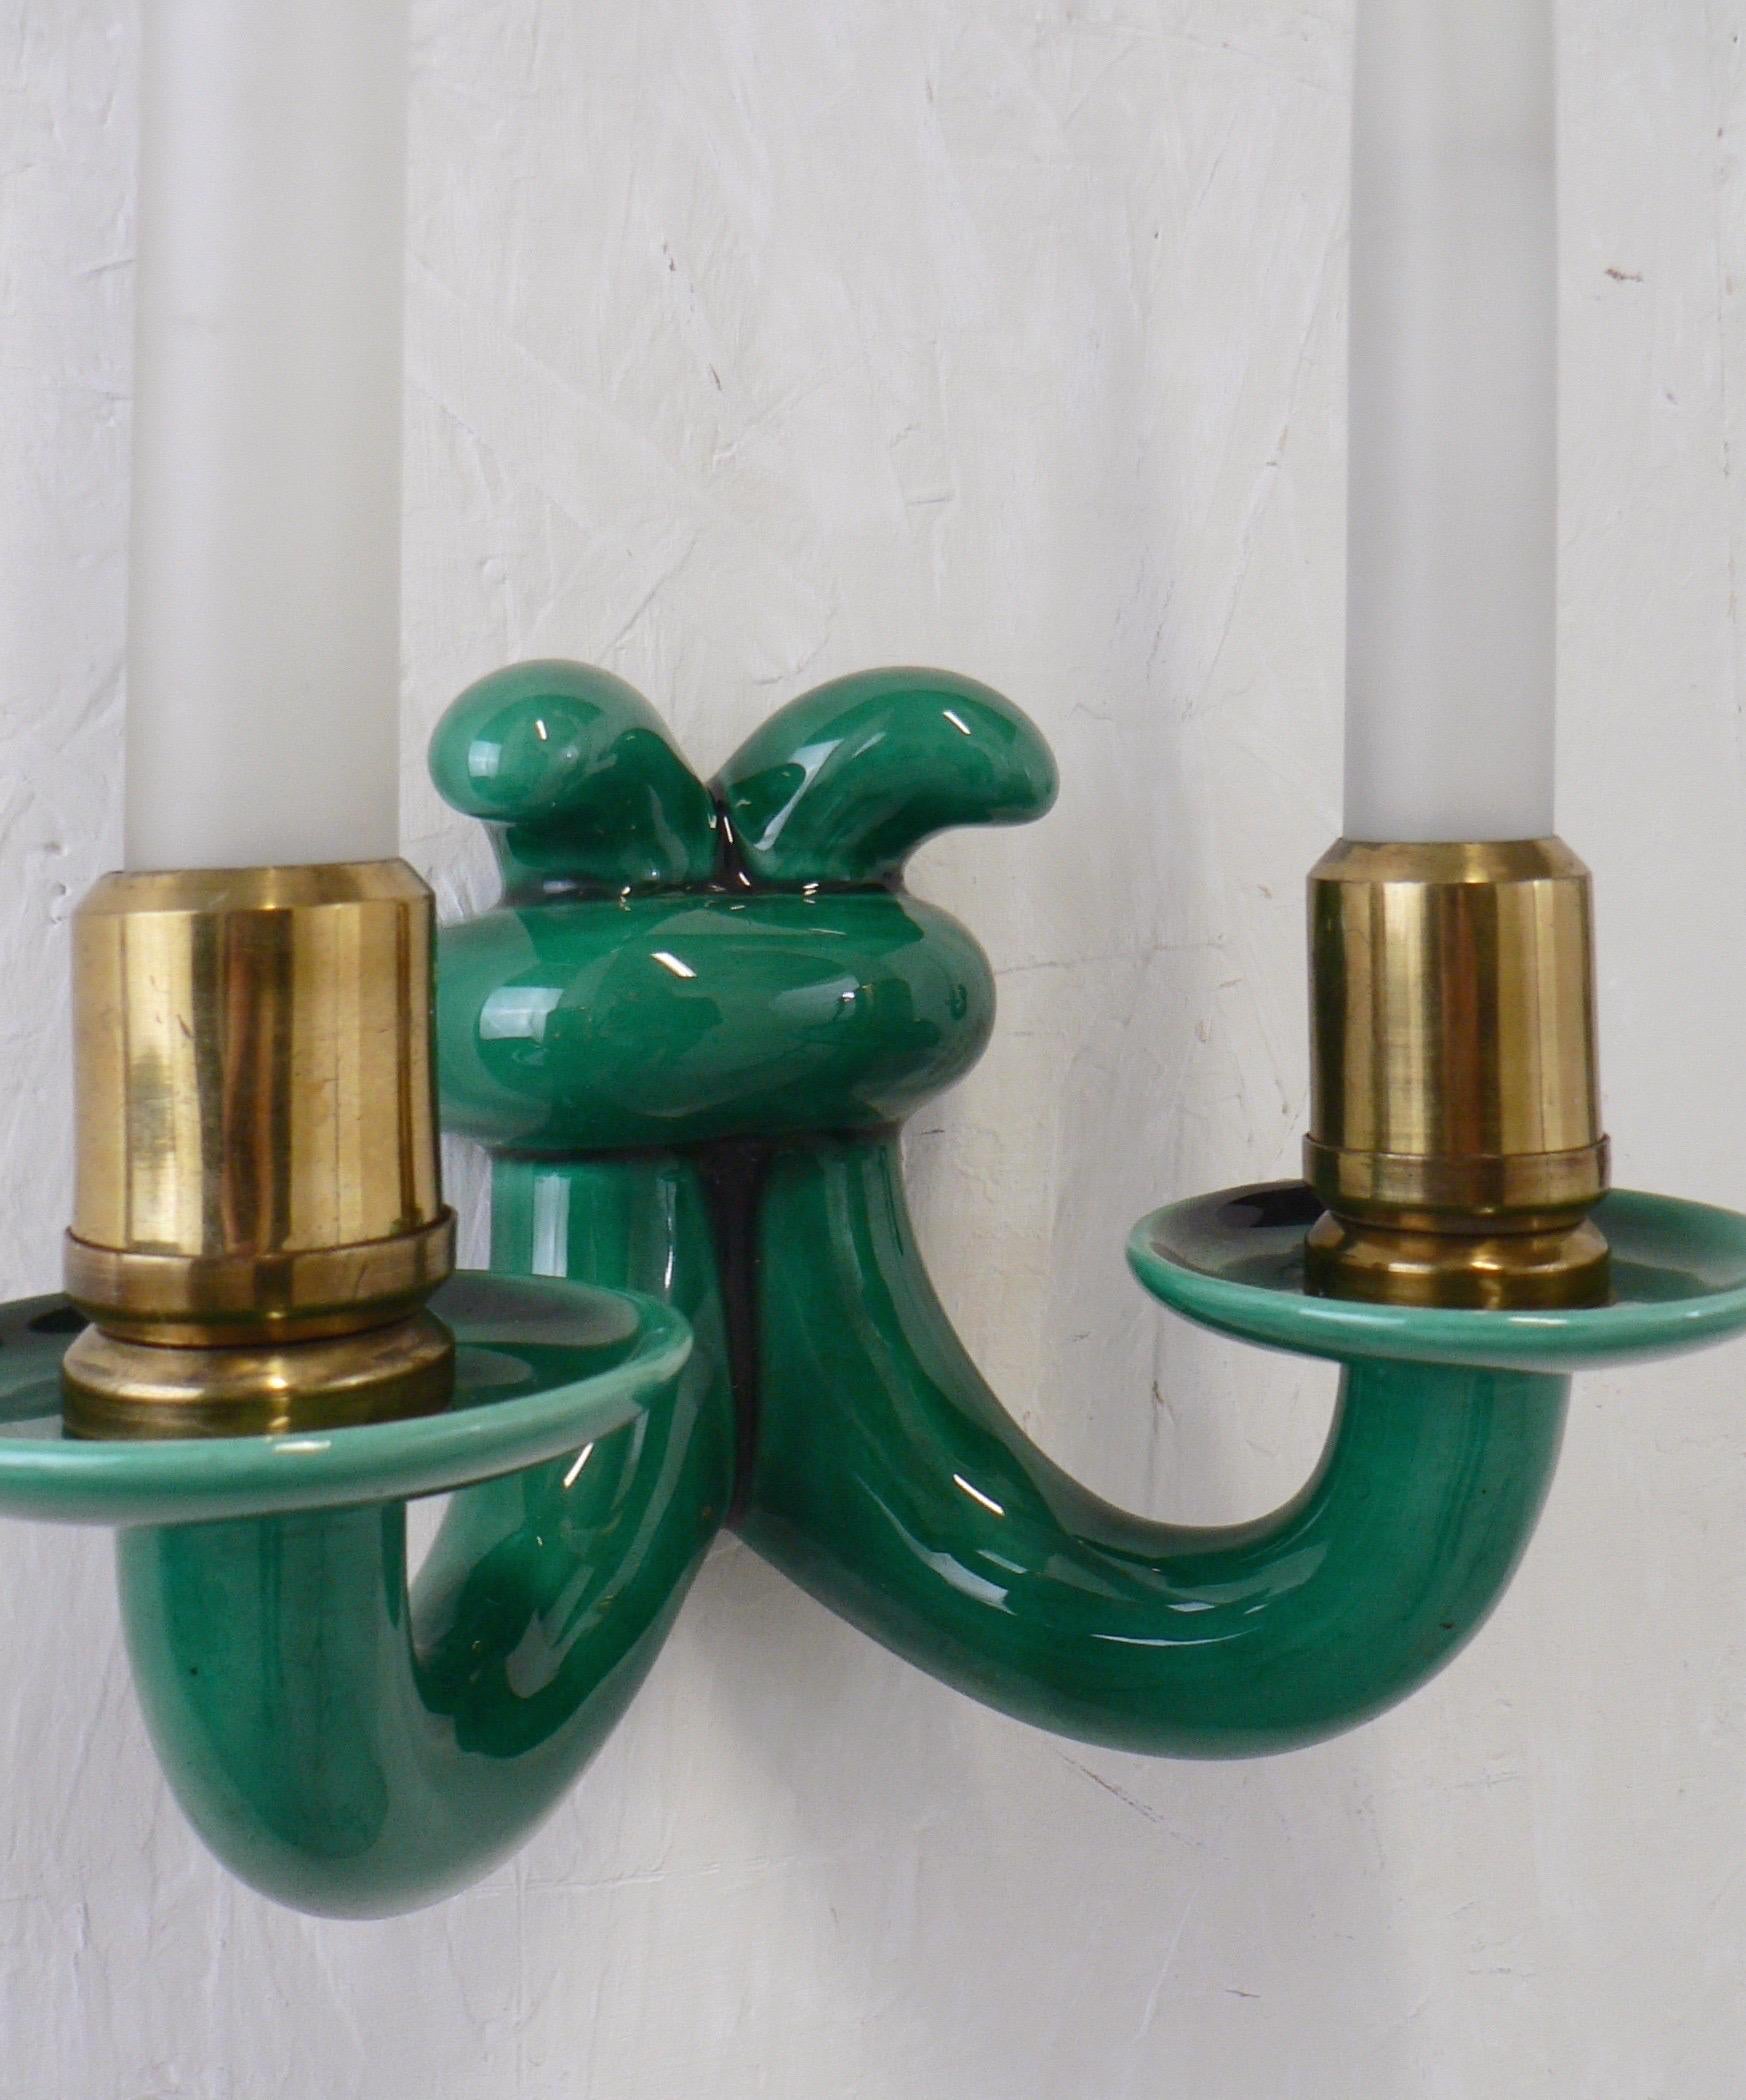 A pair of 1930 Sevres porcelain wall sconce lamps from France, featuring green enameled ceramic on brass bases. 
glass tulips on the lightbulb.

US rewiring on request.